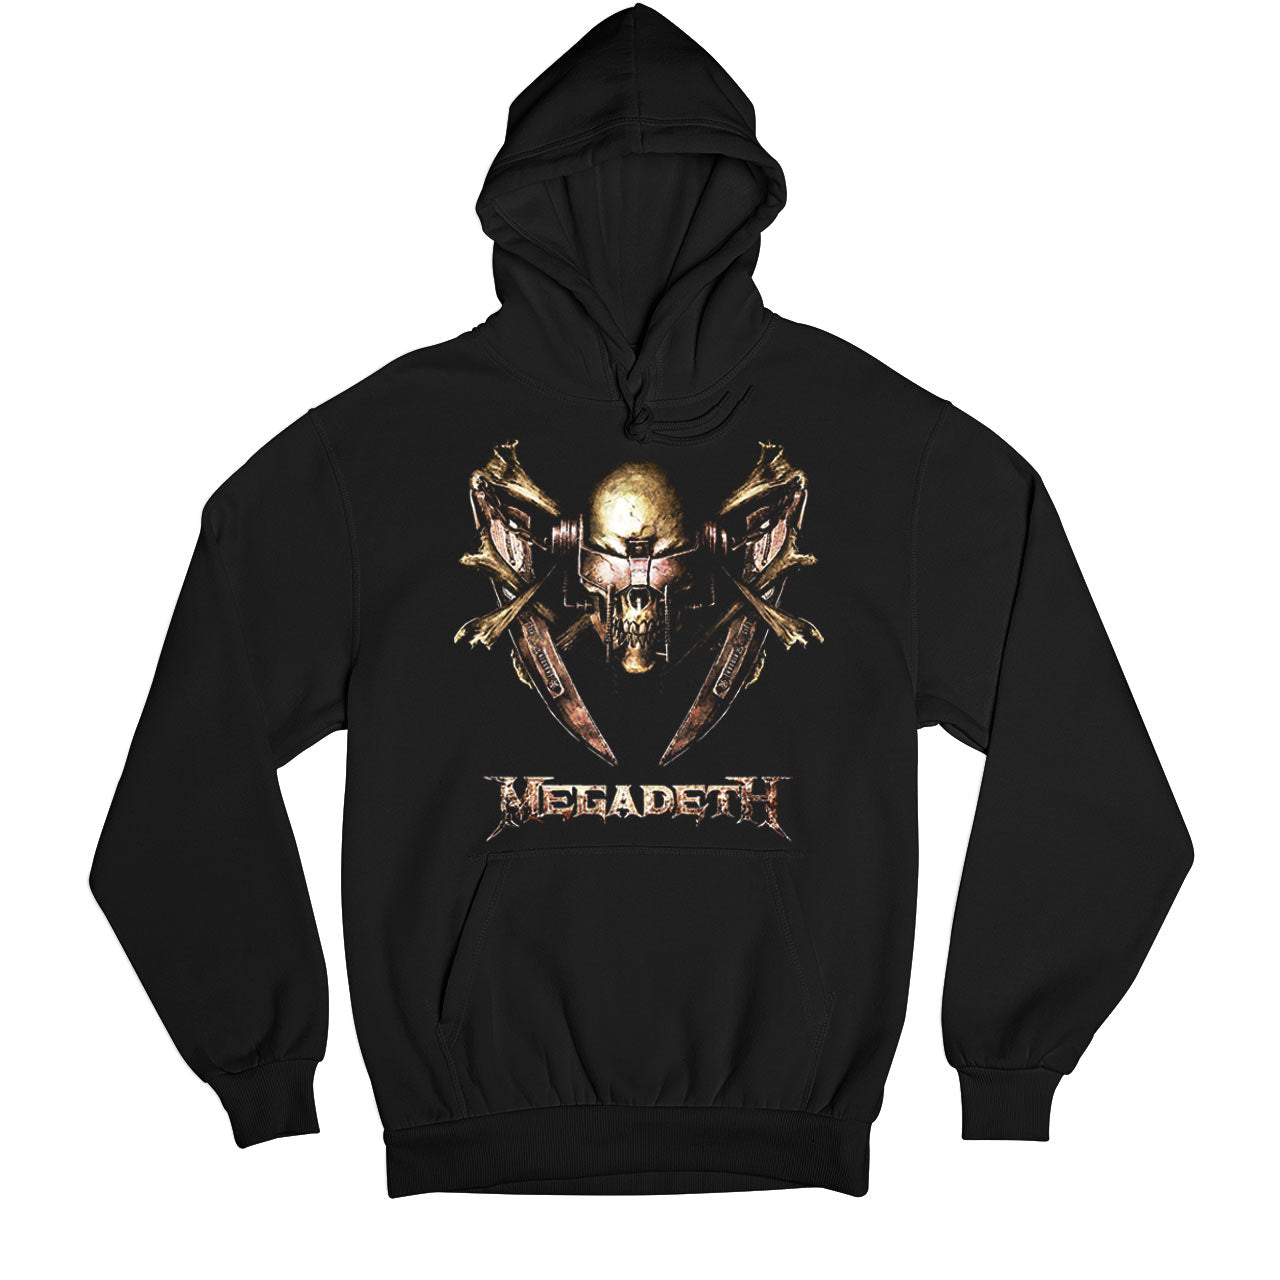 Megadeth Hoodie - On Sale - XS (Chest size 38 IN)